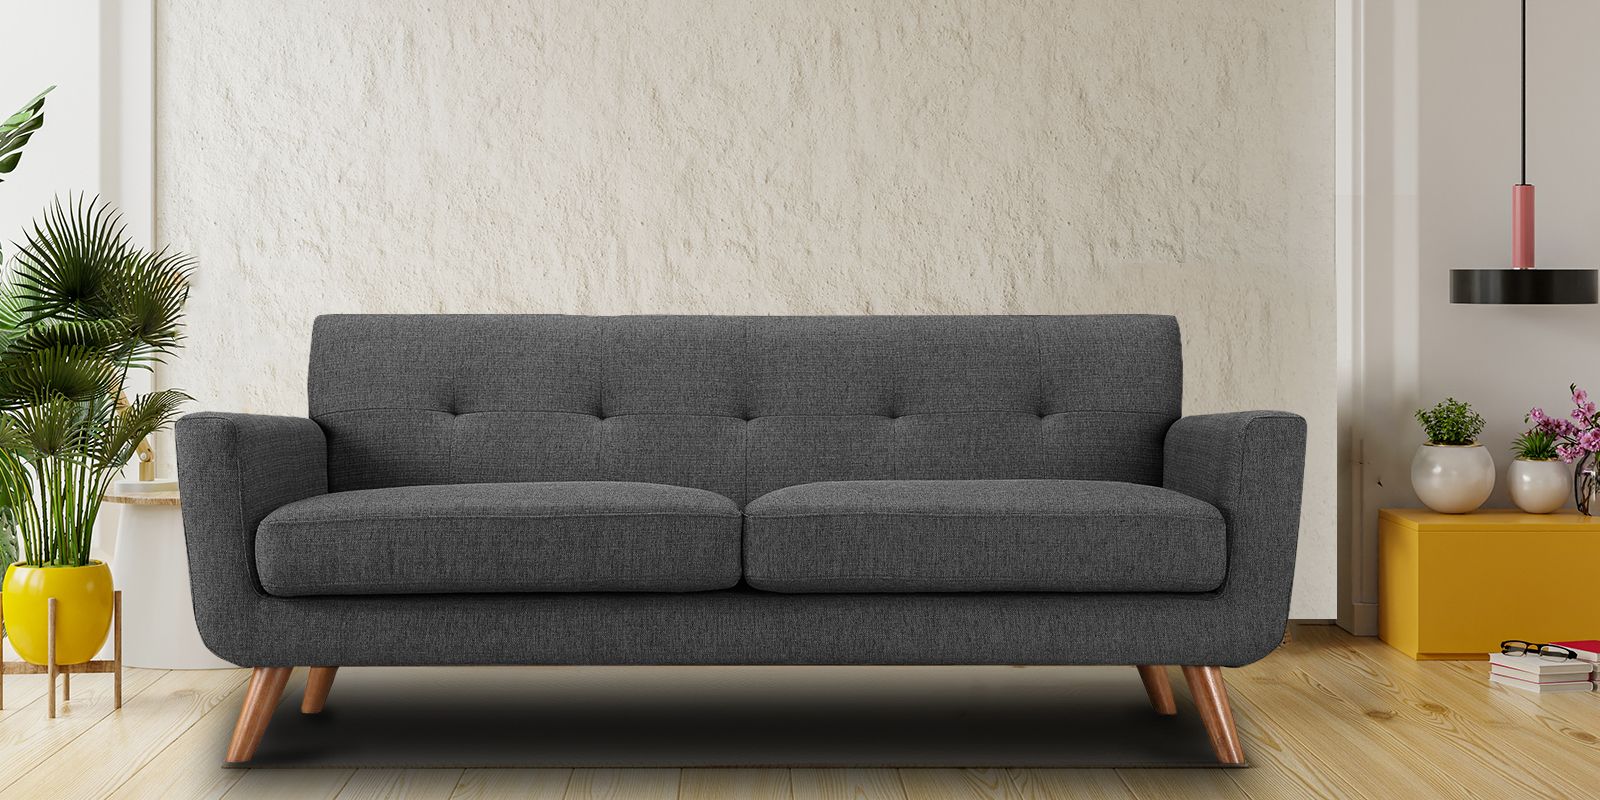 Mid Century Classic 3 Seater Sofa In Grey Colour – Dreamzz Furniture Throughout Mid Century 3 Seat Couches (View 6 of 20)